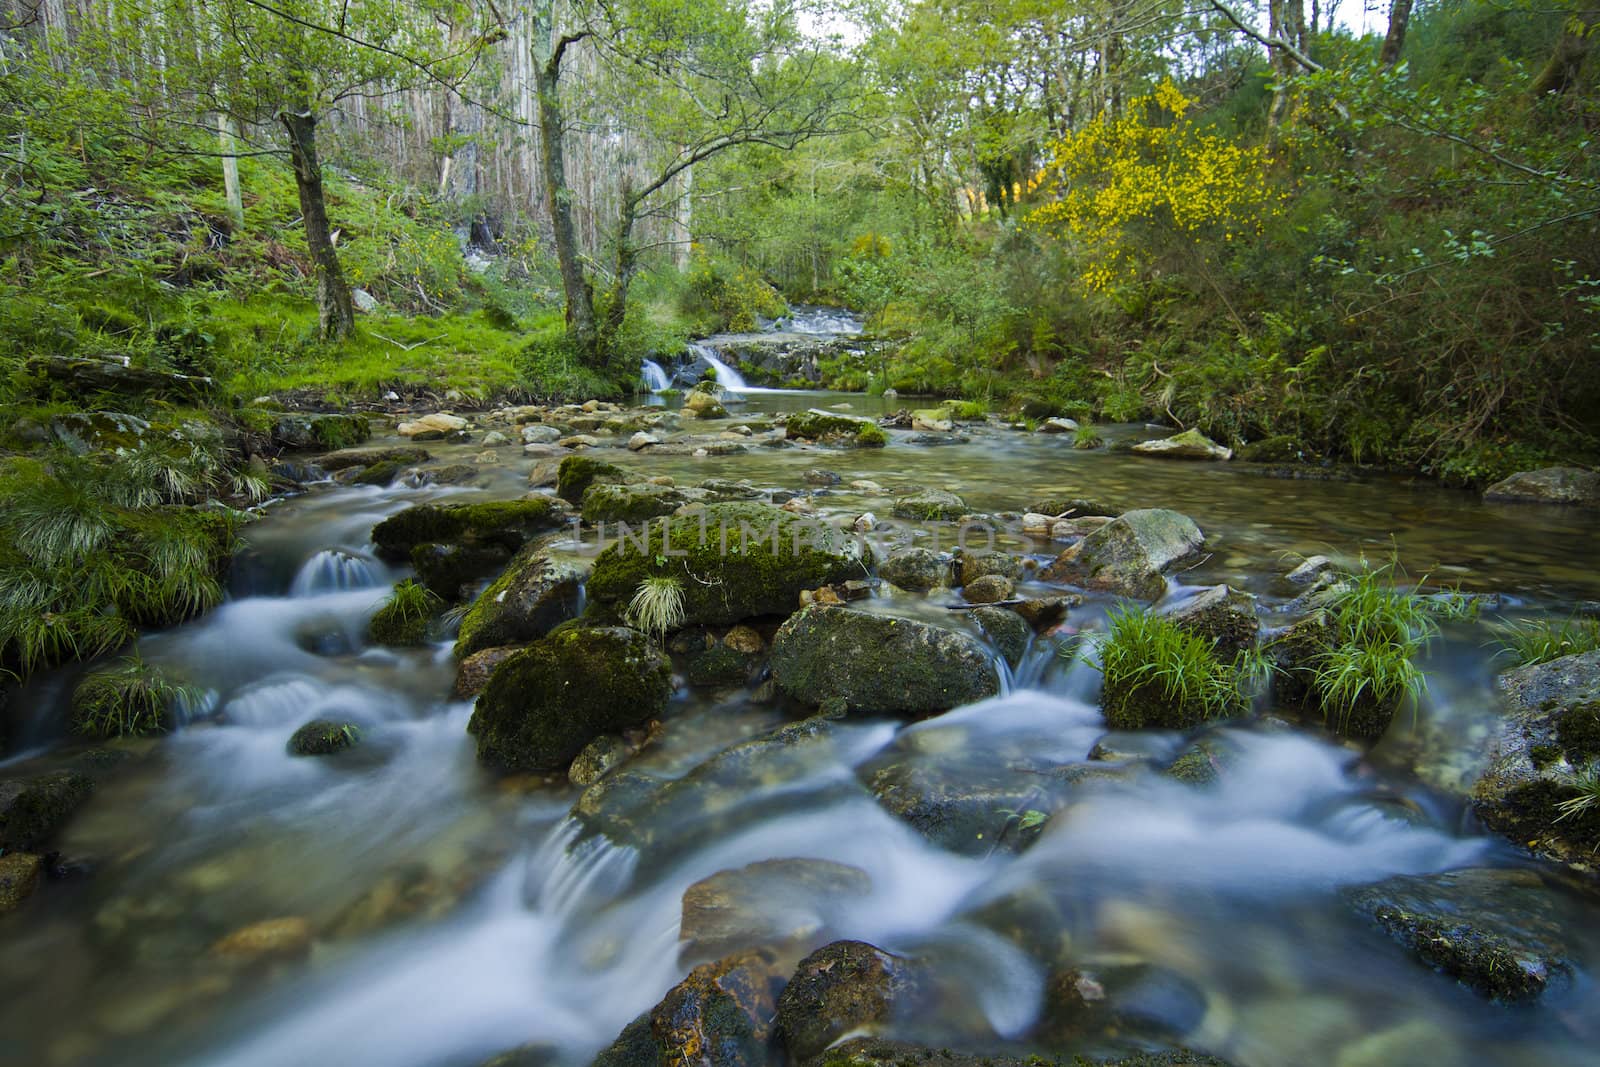 Water flows along a mountain stream in Galicia, Spain by dannyus